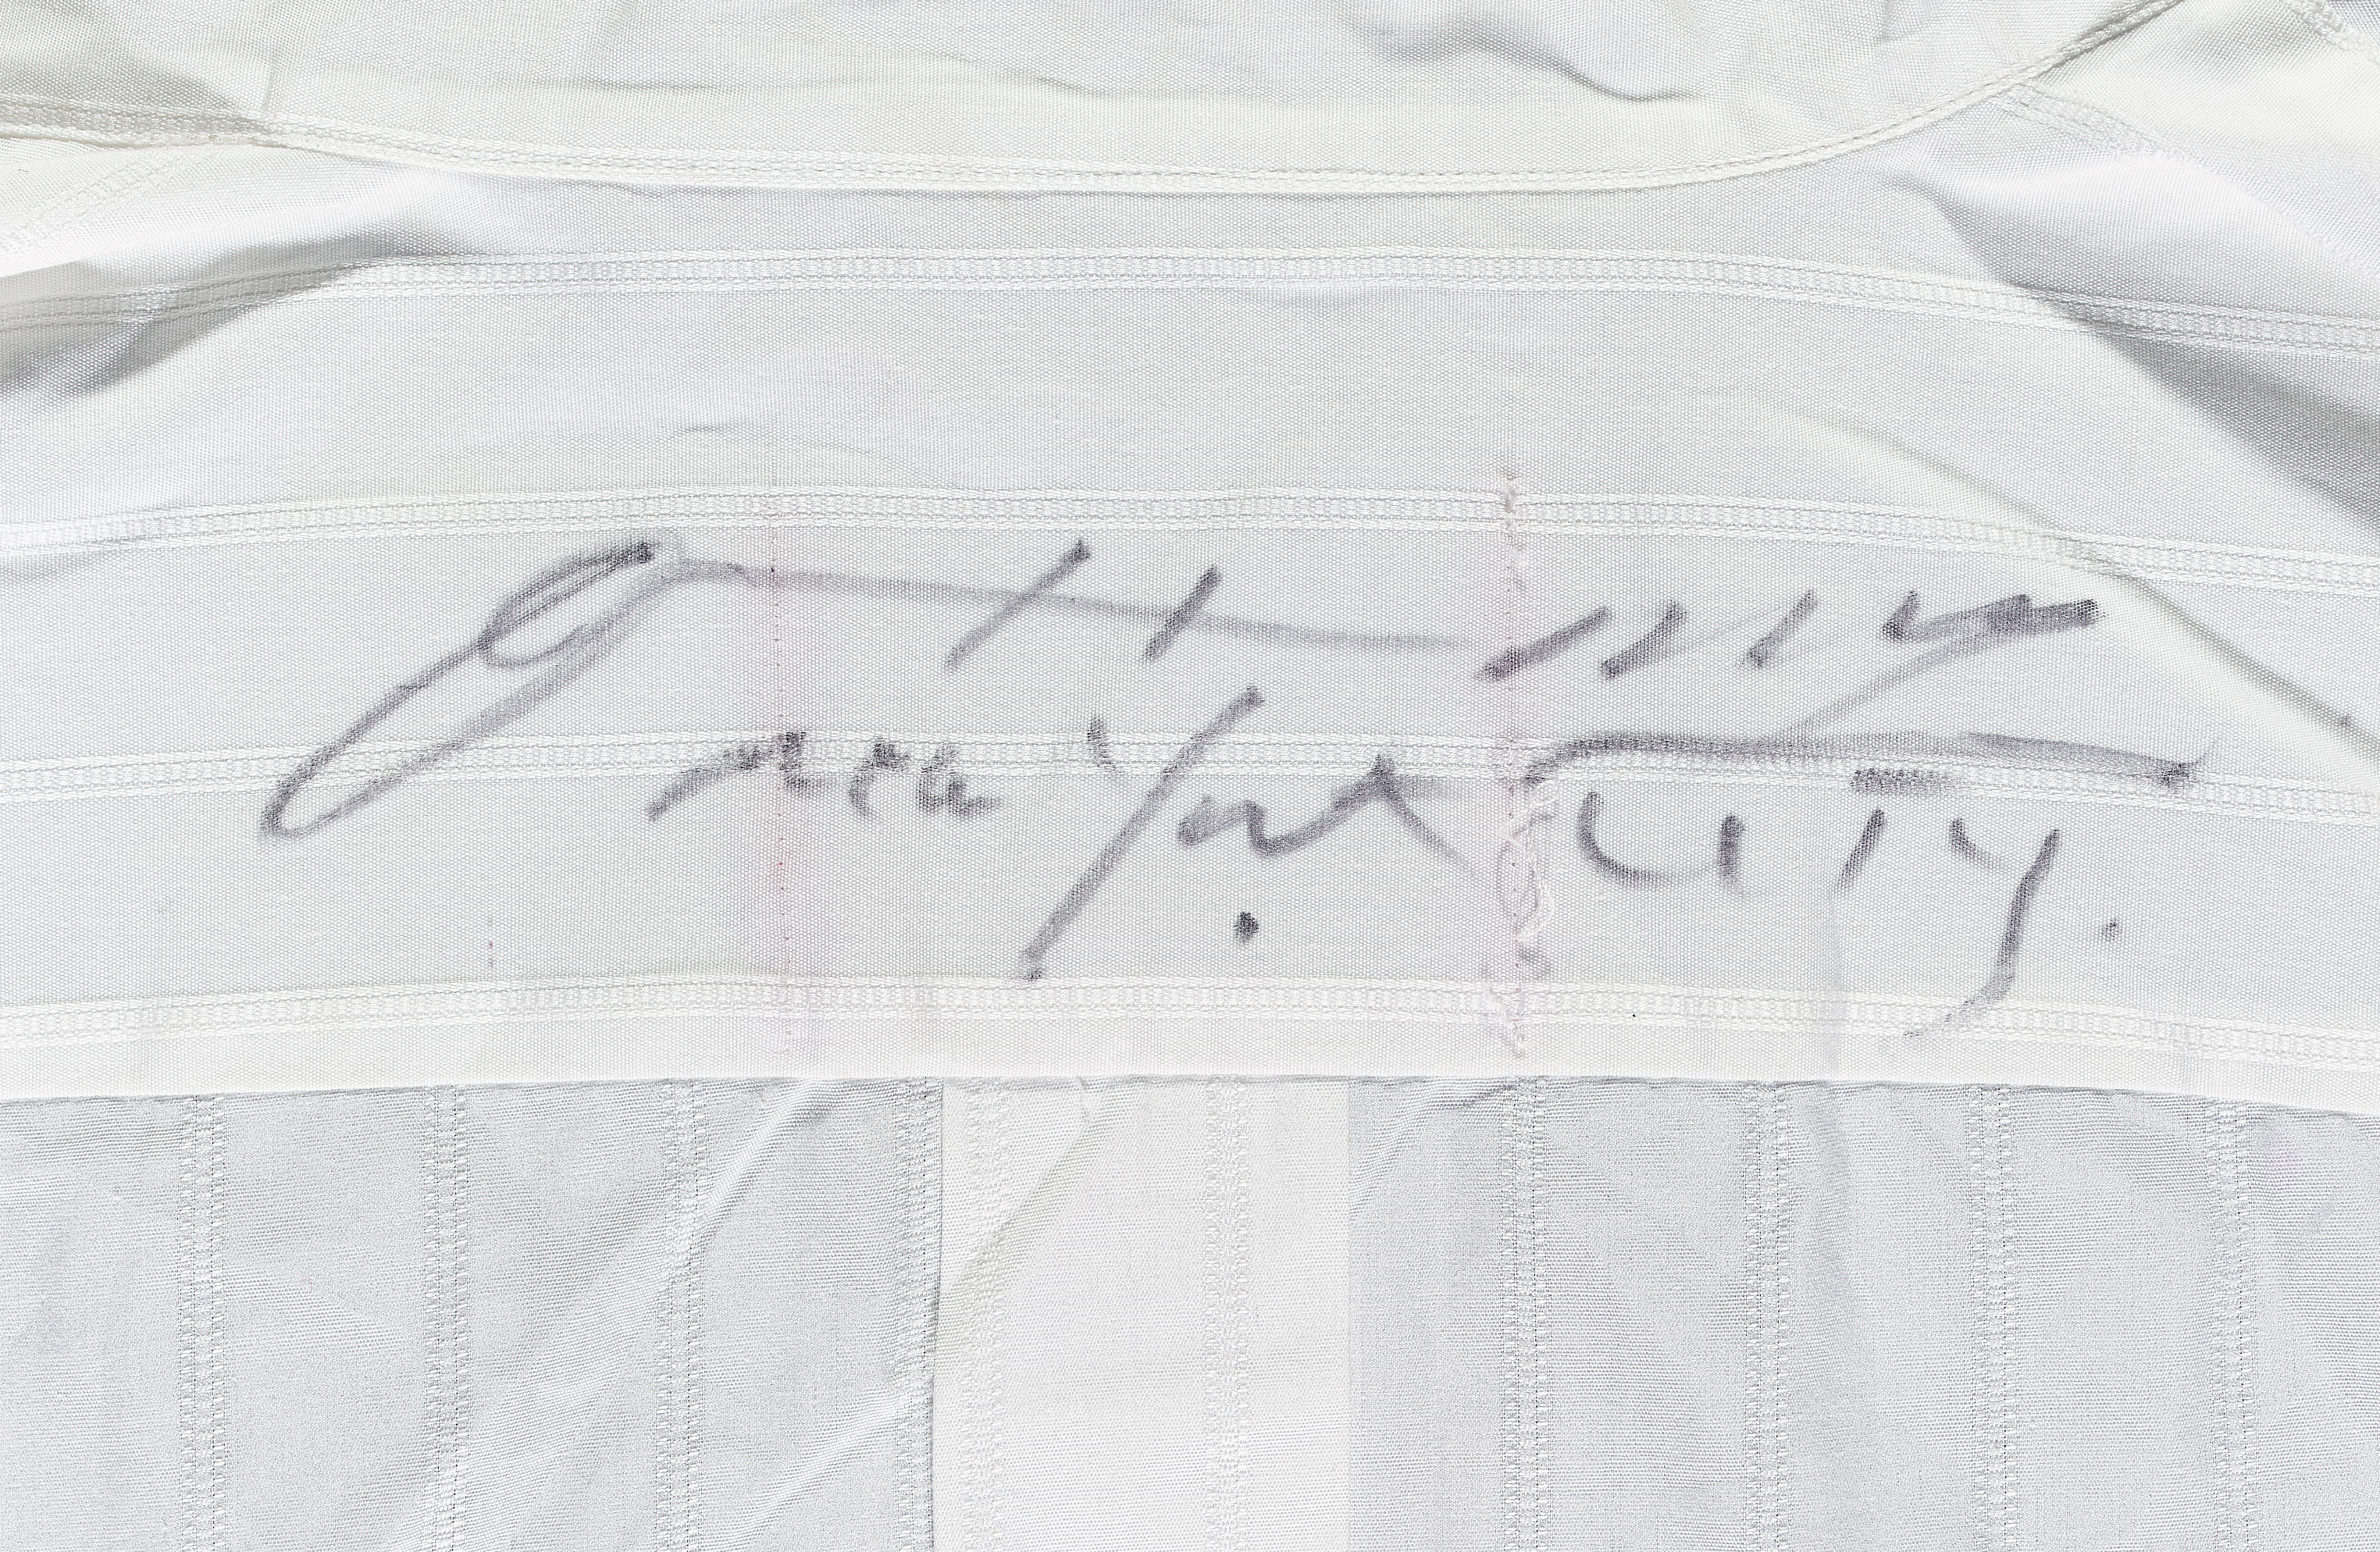 dress shirt worn and signed on collar by Patti Smith